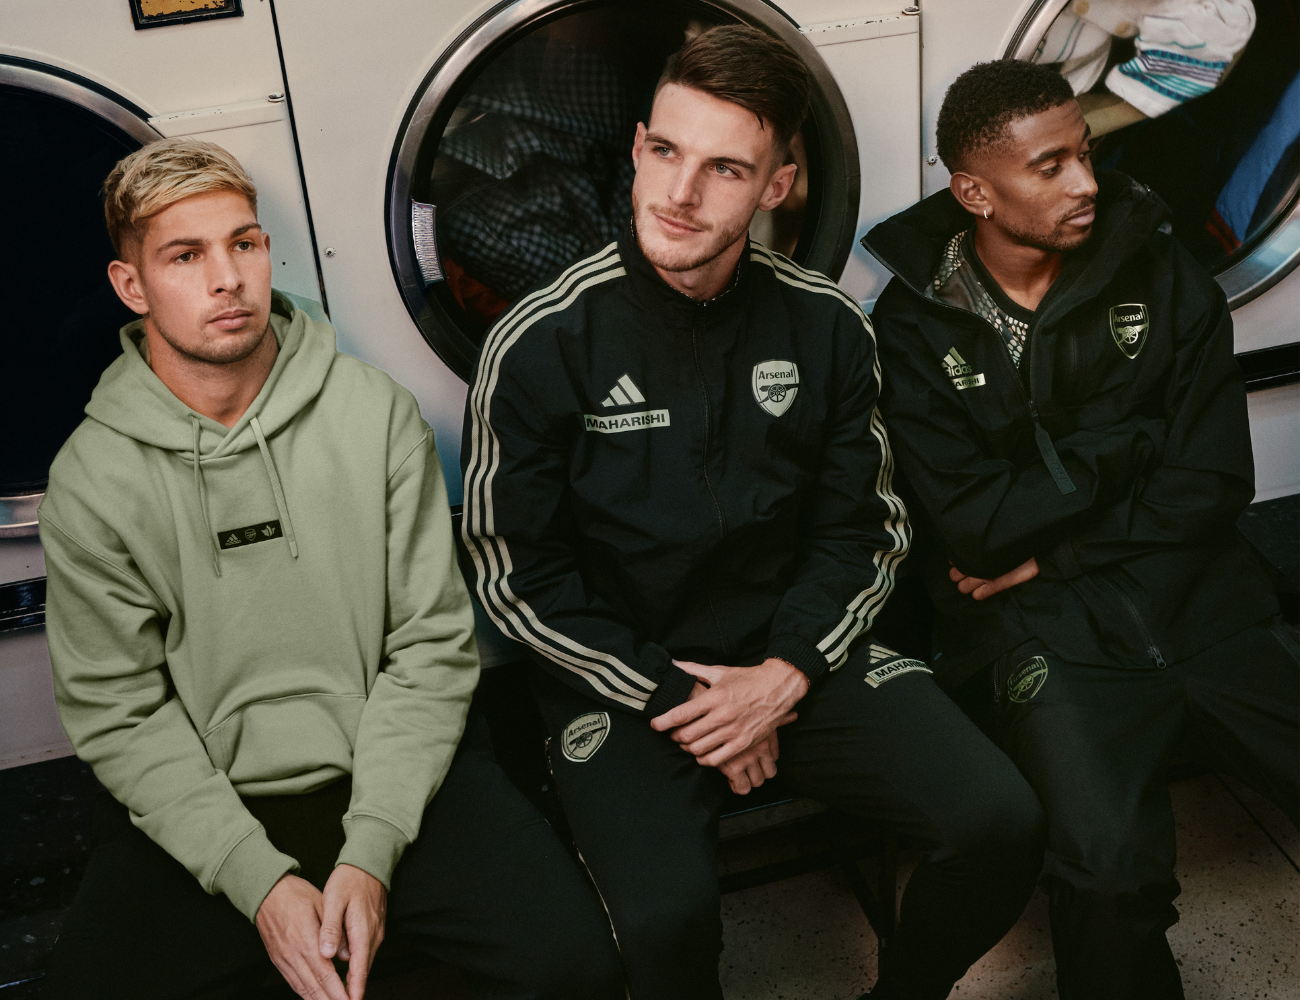 Adidas X Arsenal X Maharishi Capsule Collection: Celebrating the best of Football in London